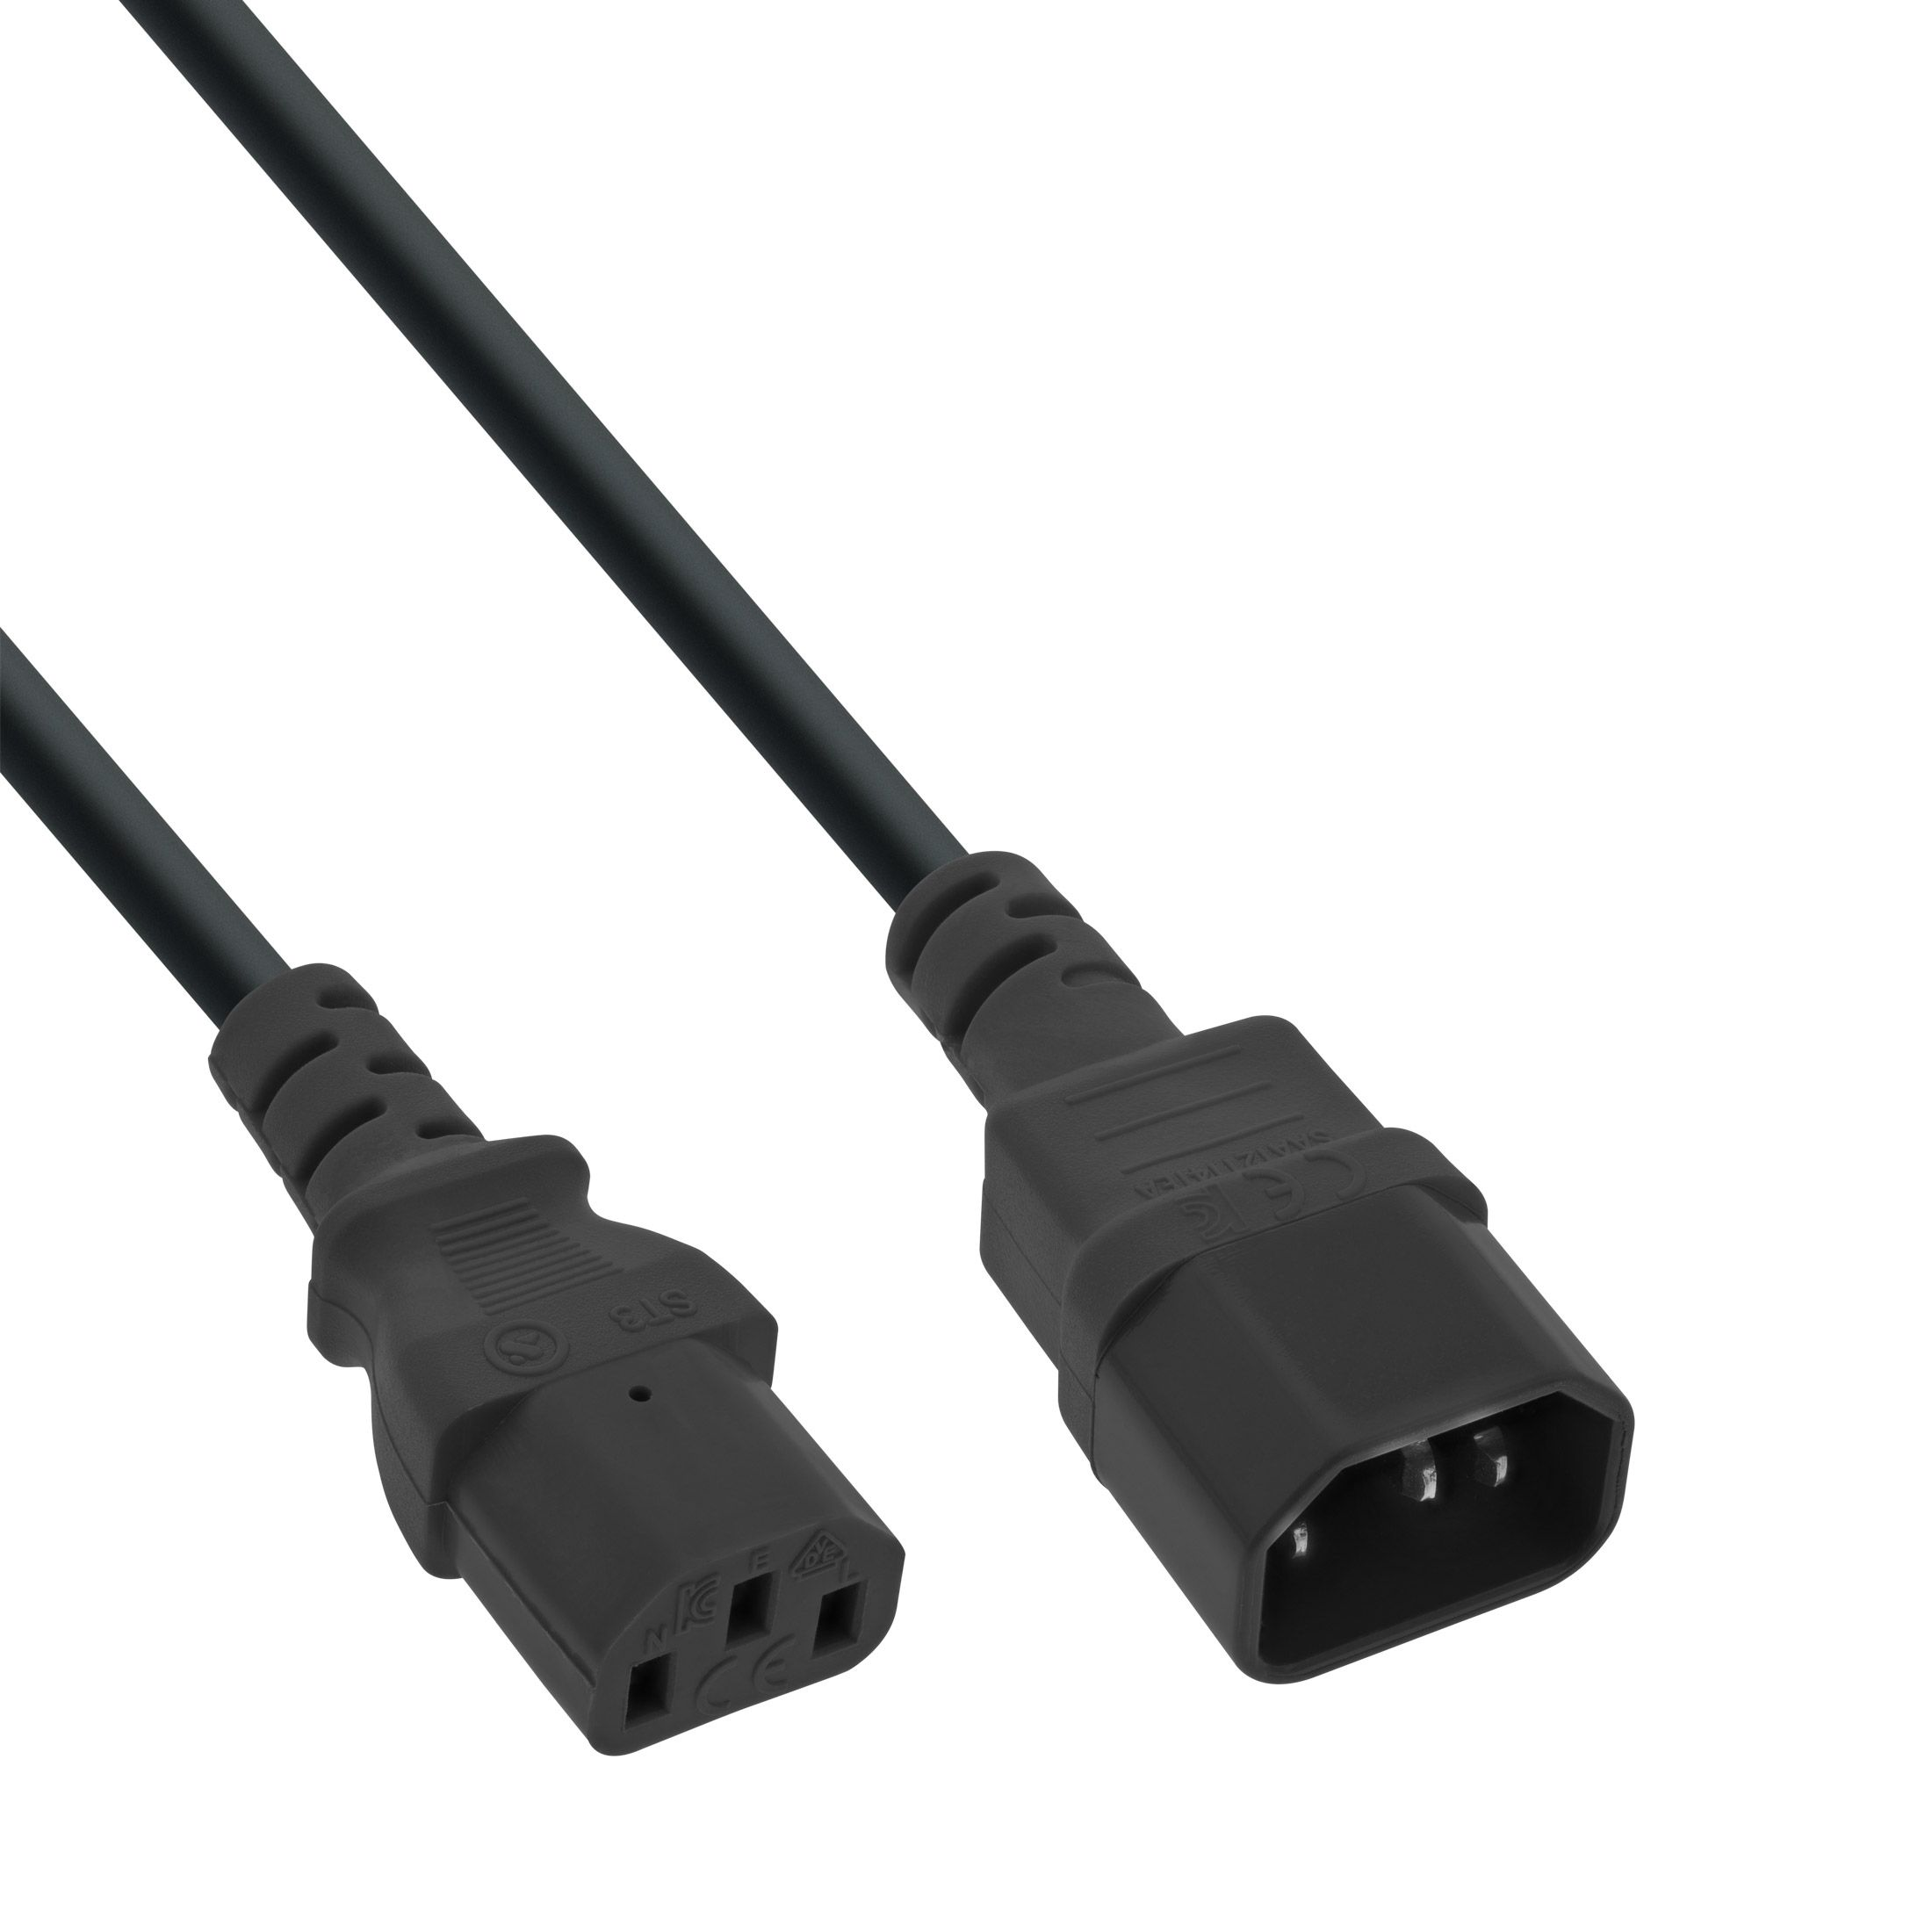 Power cord extension cable C13 to C14 30cm